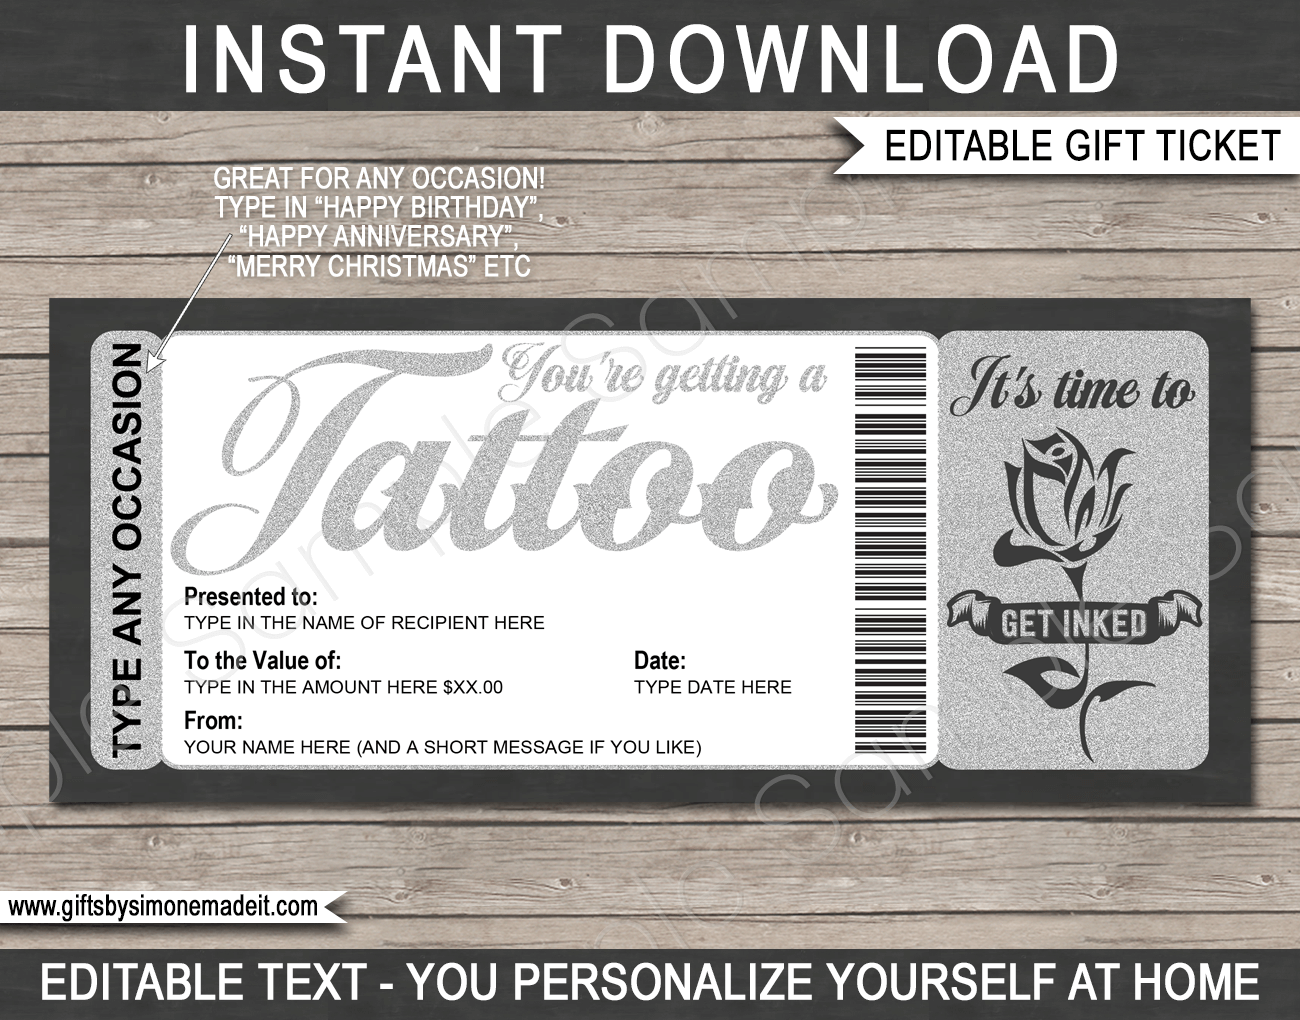 https://www.giftsbysimonemadeit.com/wp-content/uploads/2020/09/Any-Occasion-Tattoo-Gift-Voucher-ROSE-SILVER.png